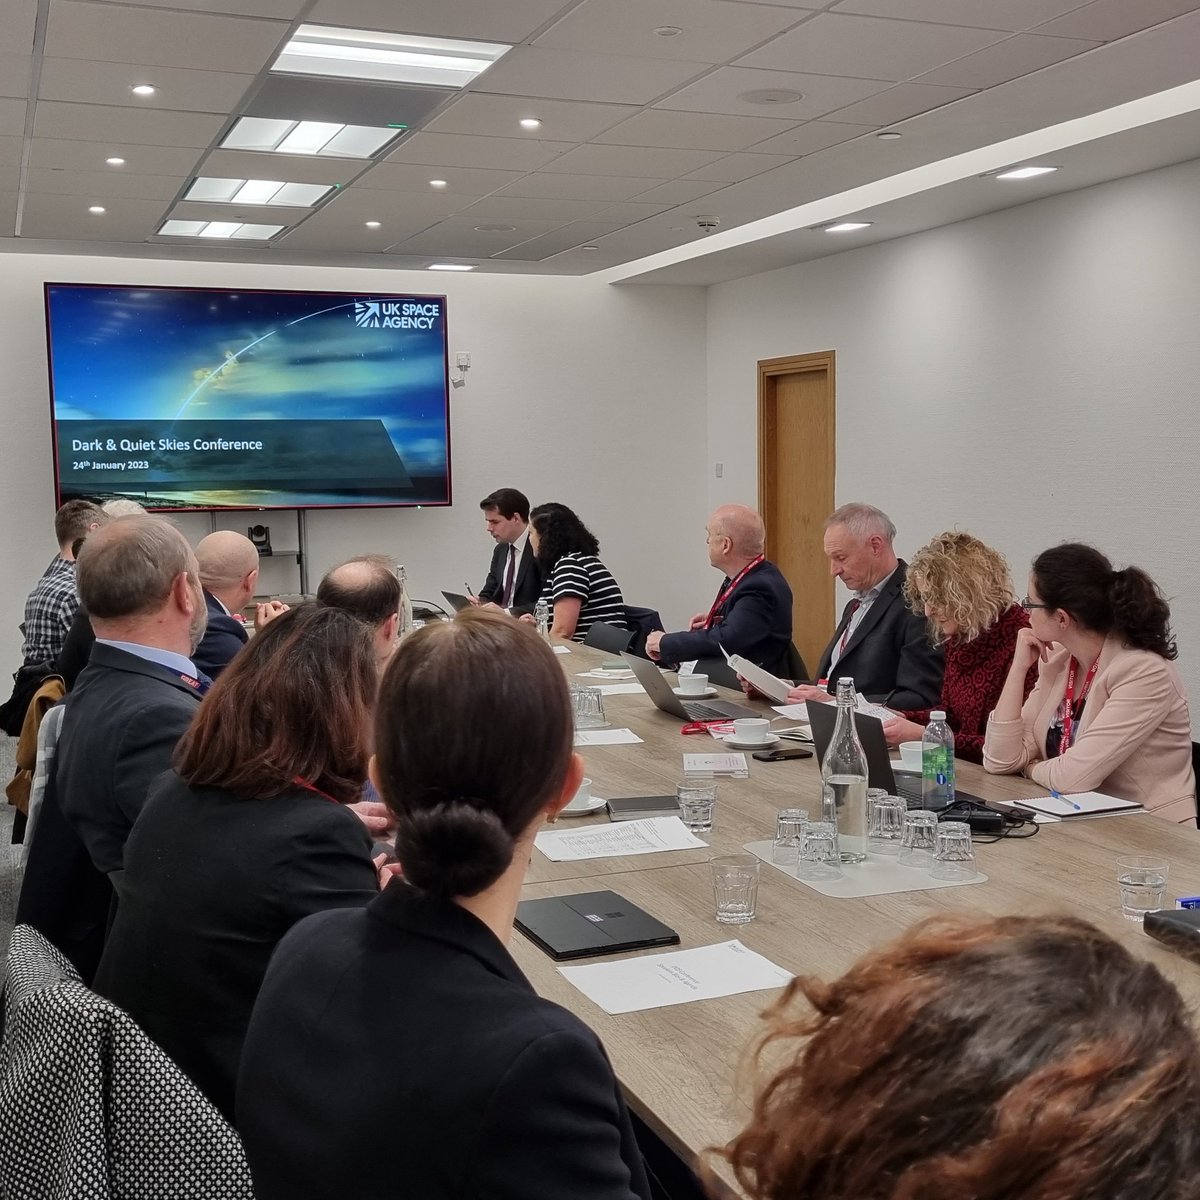 It was a great pleasure presenting at the Dark & Quiet Skies Conference organised by the @spacegovuk along with esteemed professionals who are exploring the solutions to the alarmingly increasing rate of satellites, space junk & light pollution. #ukspaceagency #underonesky